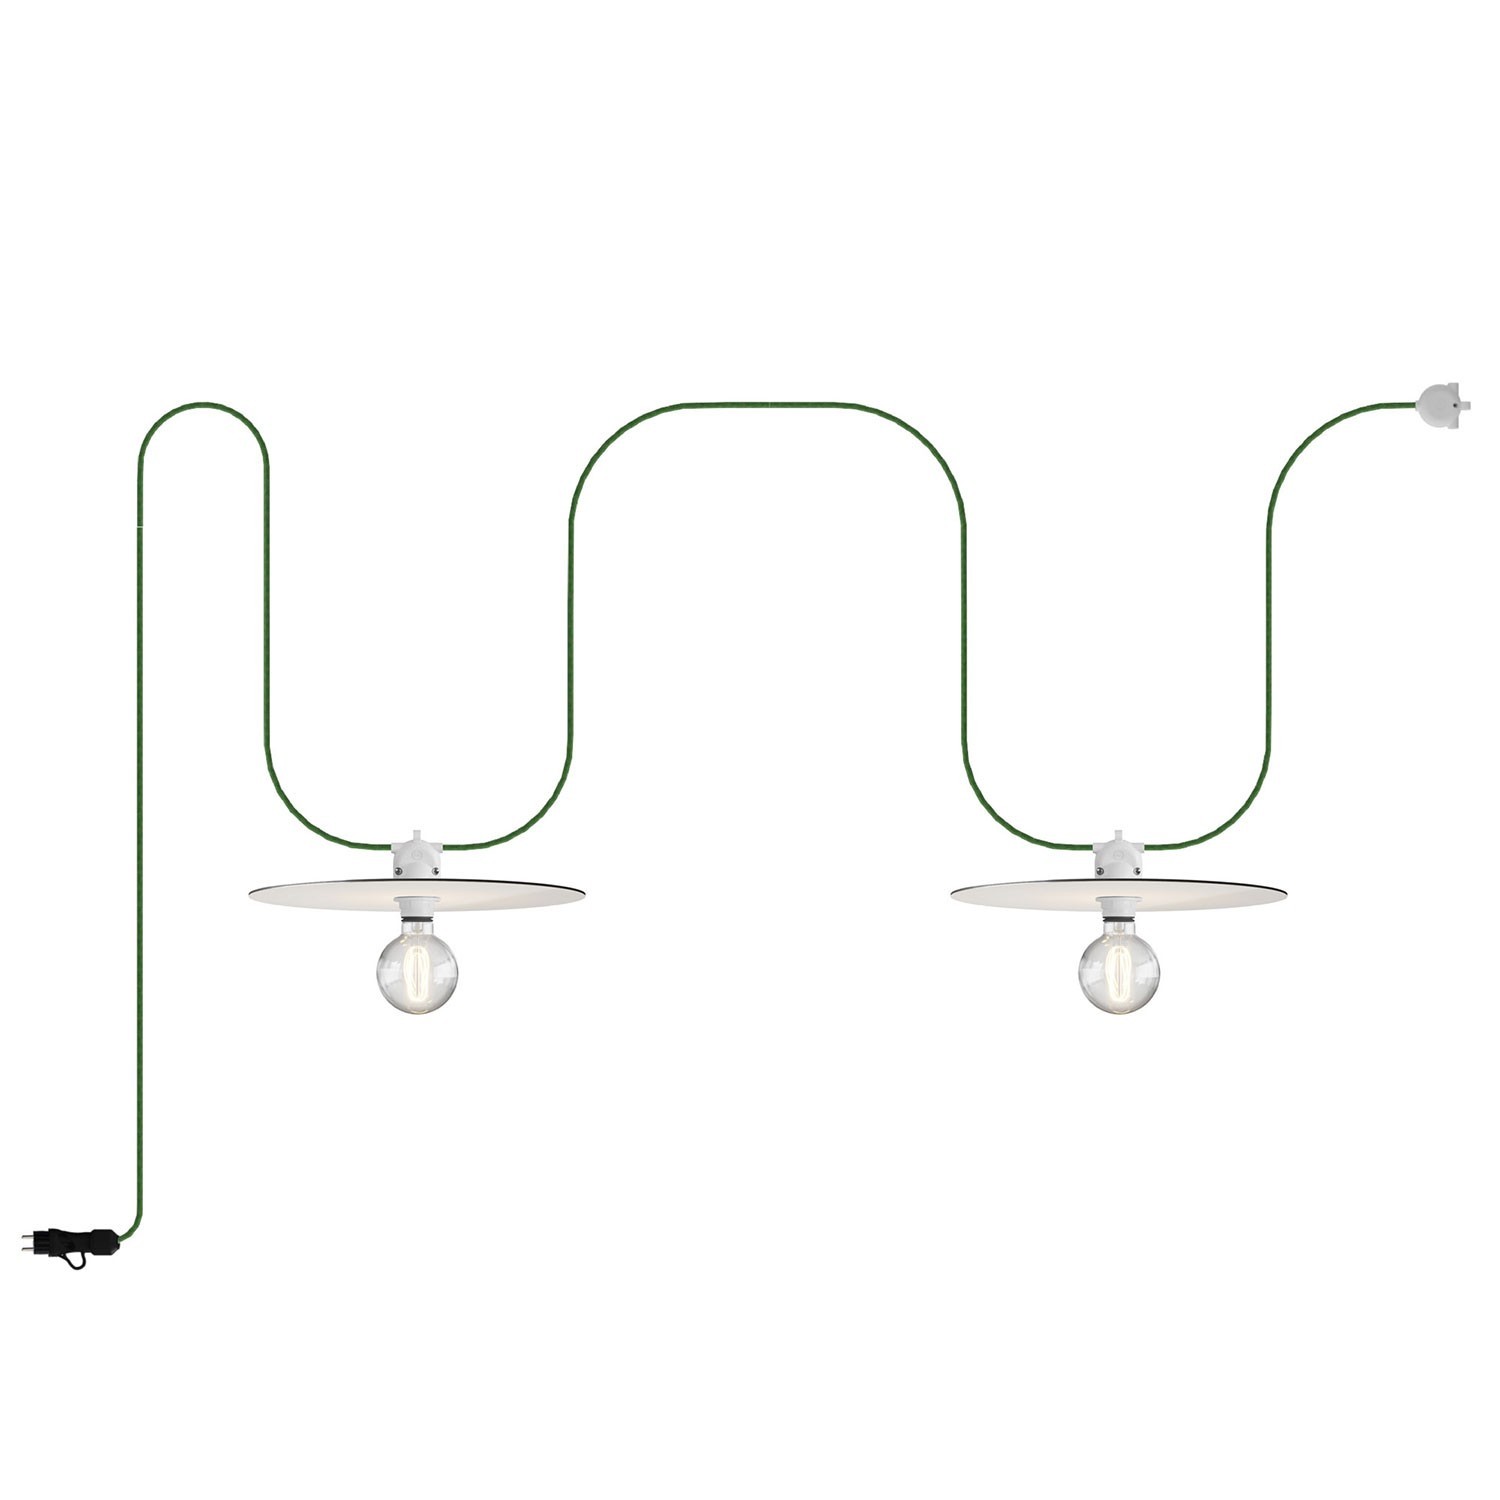 EIVA Portable outdoor string light IP65 with 2 lampshades